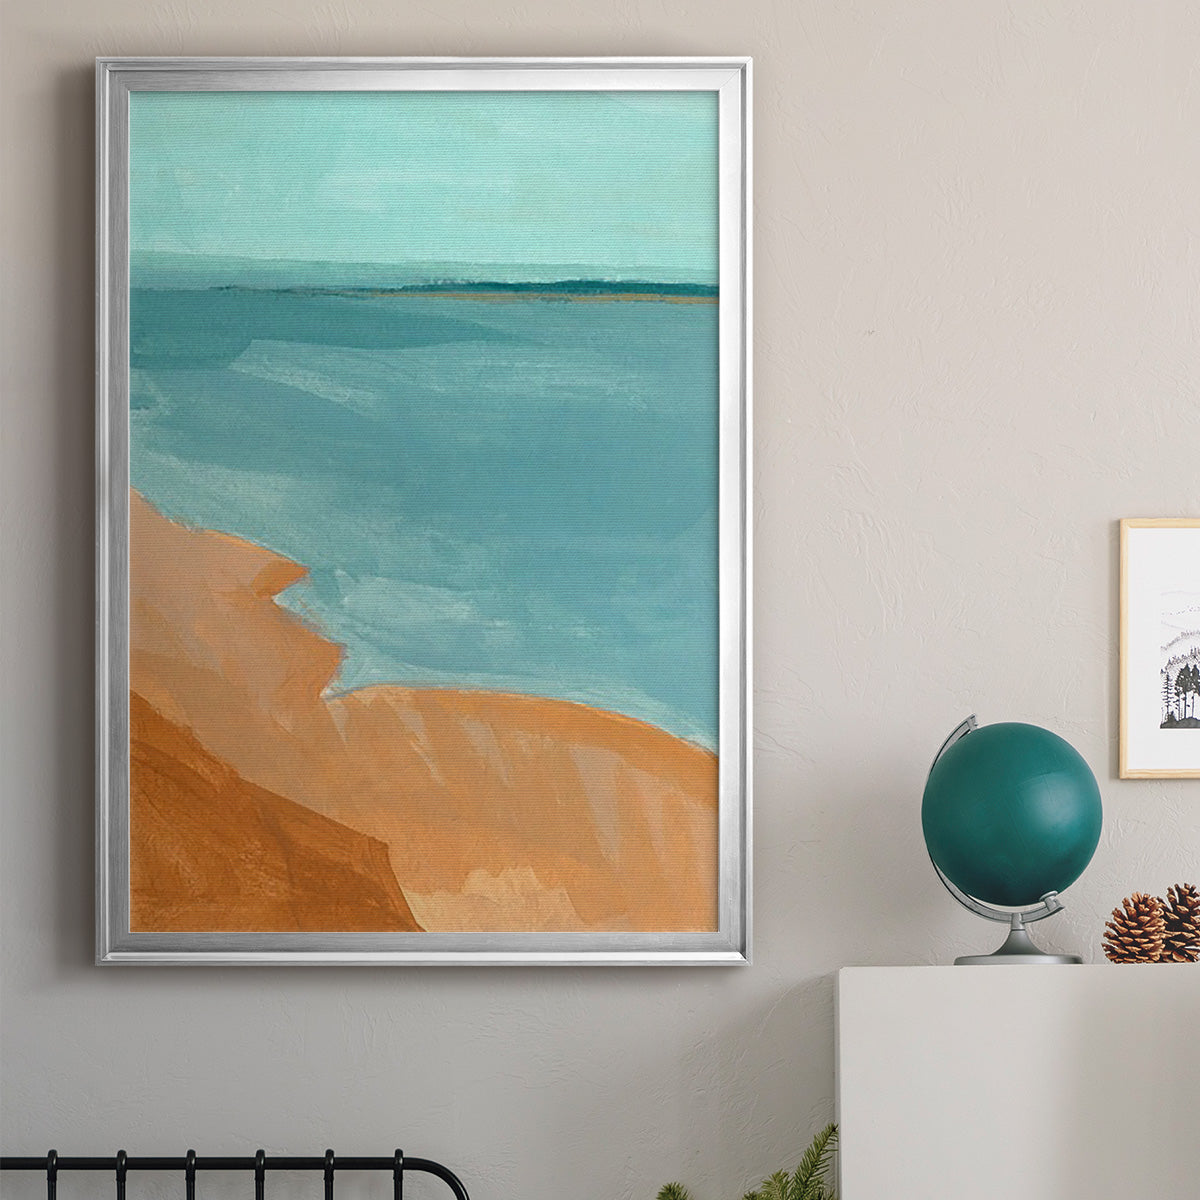 Out on the Sandbar II Premium Framed Print - Ready to Hang